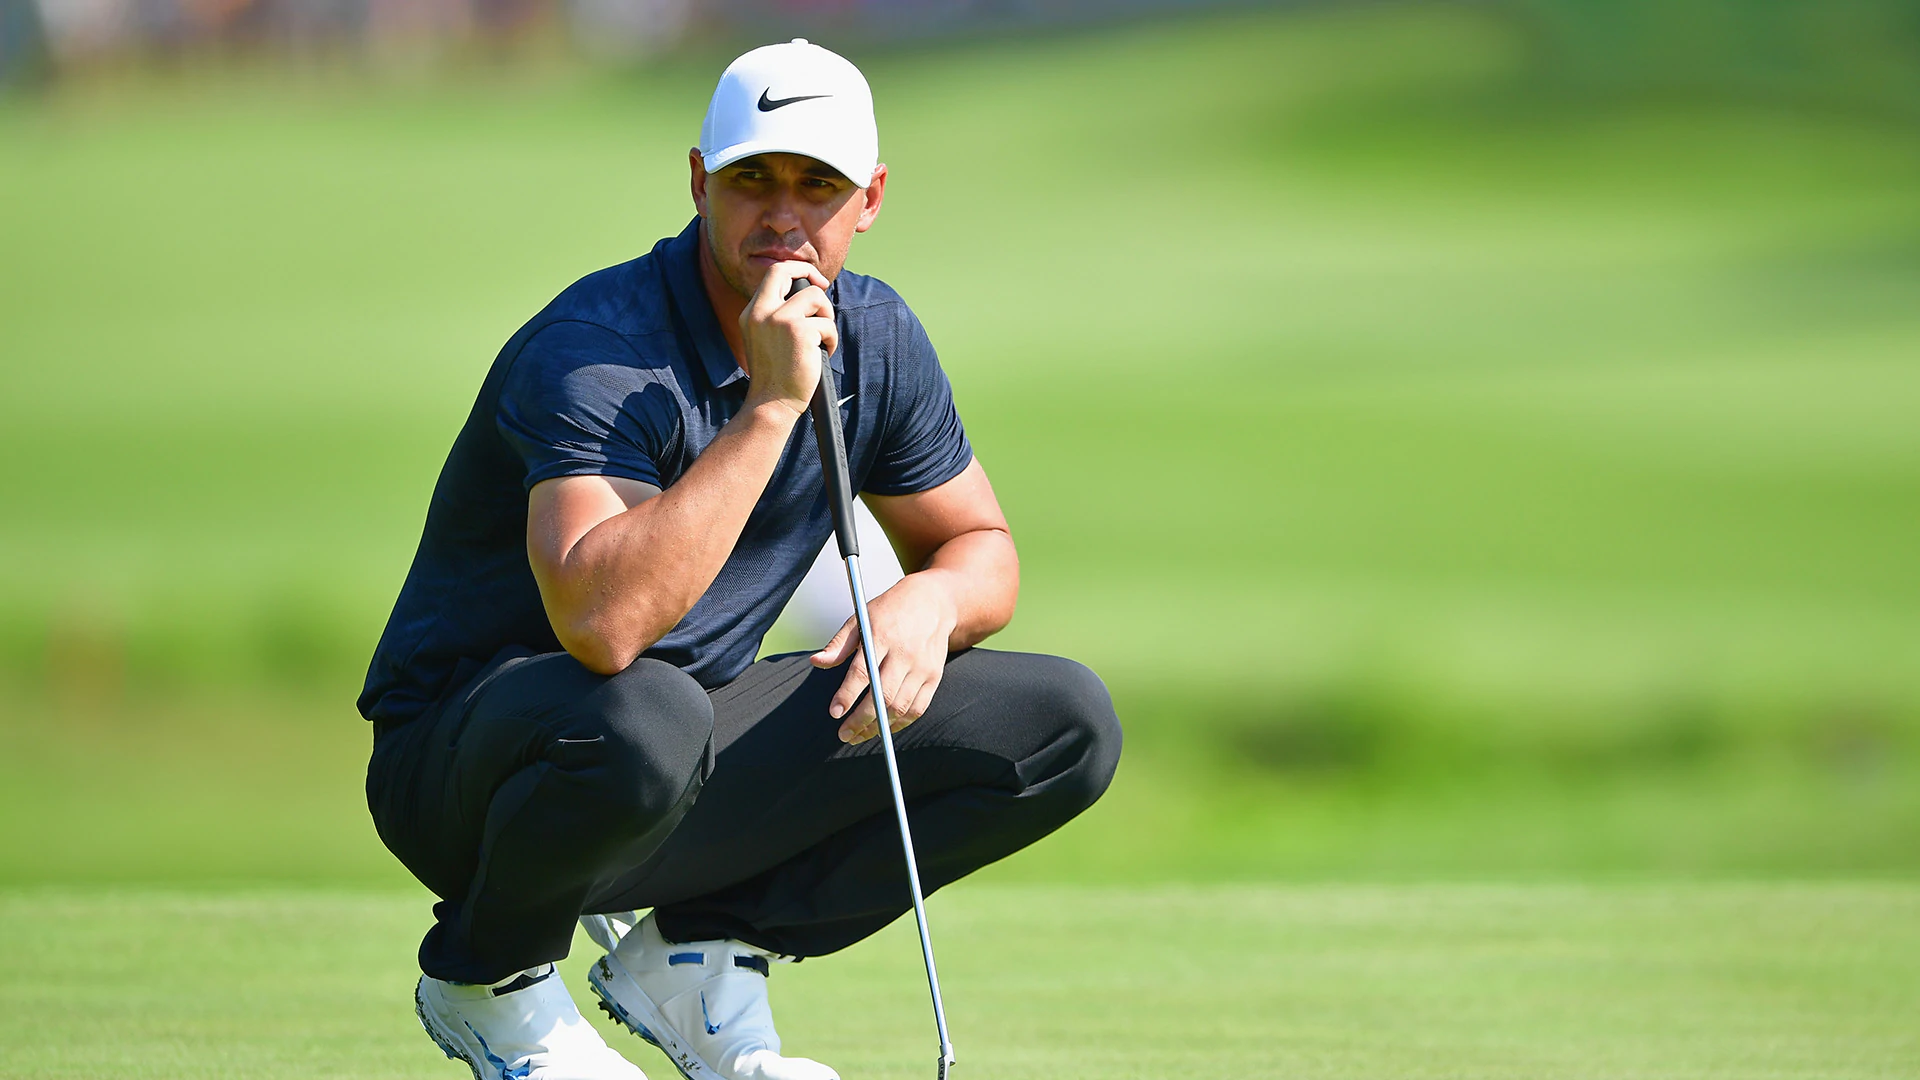 Koepka adds a 63 to his major-championship resume